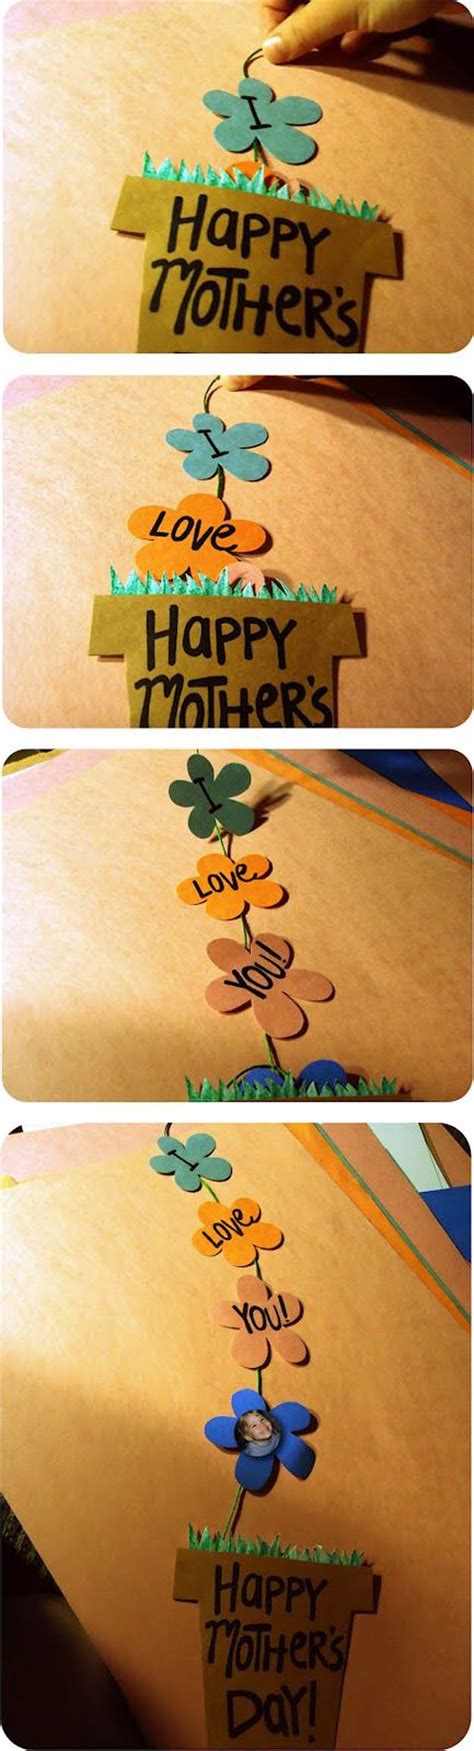 This happy mother's day flower pot card is the perfect gift by itself. 15 Beautiful Handmade Mother's Day Cards | DIY Ready